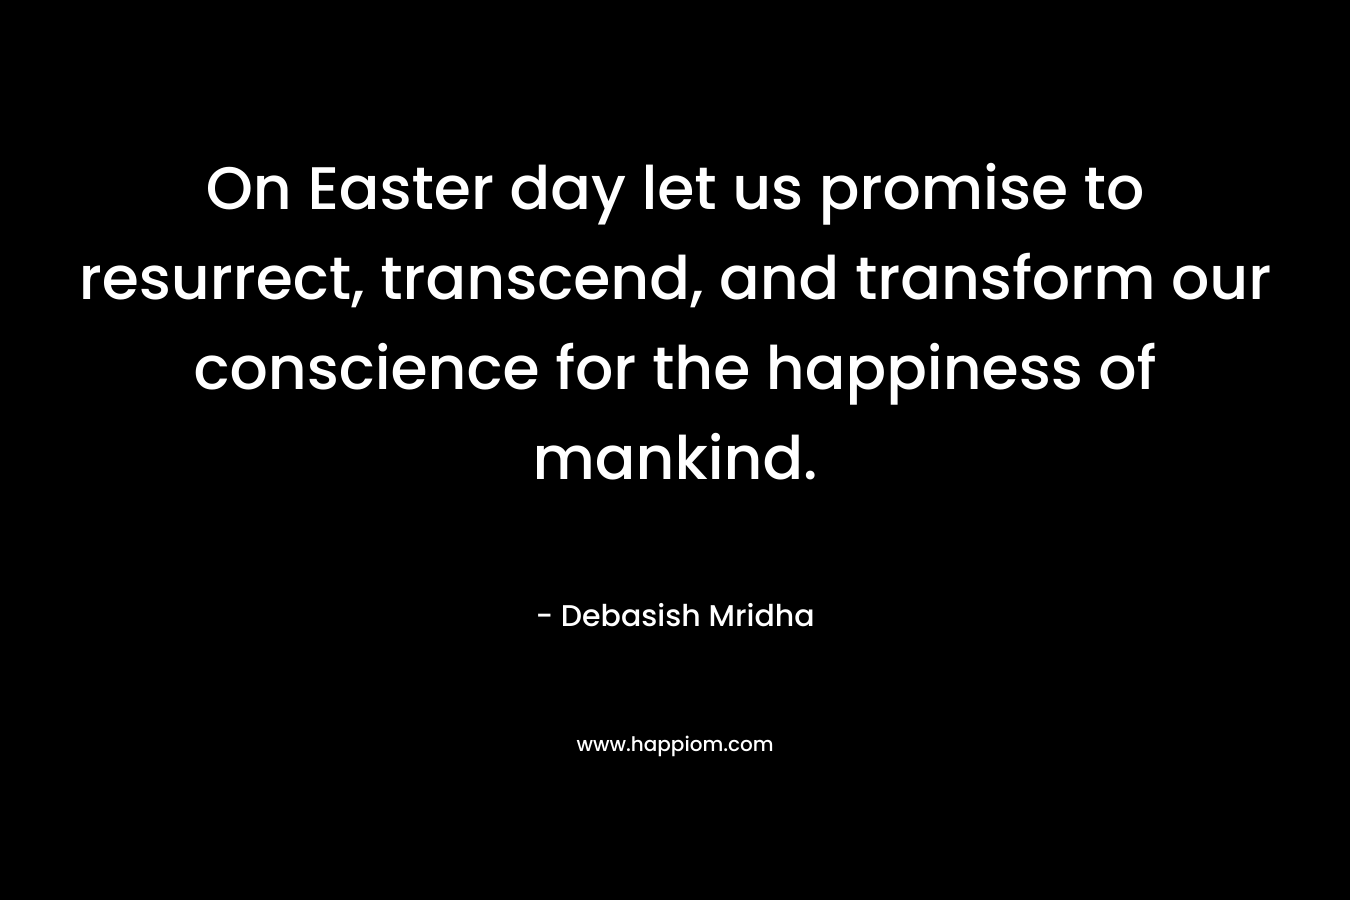 On Easter day let us promise to resurrect, transcend, and transform our conscience for the happiness of mankind. – Debasish Mridha